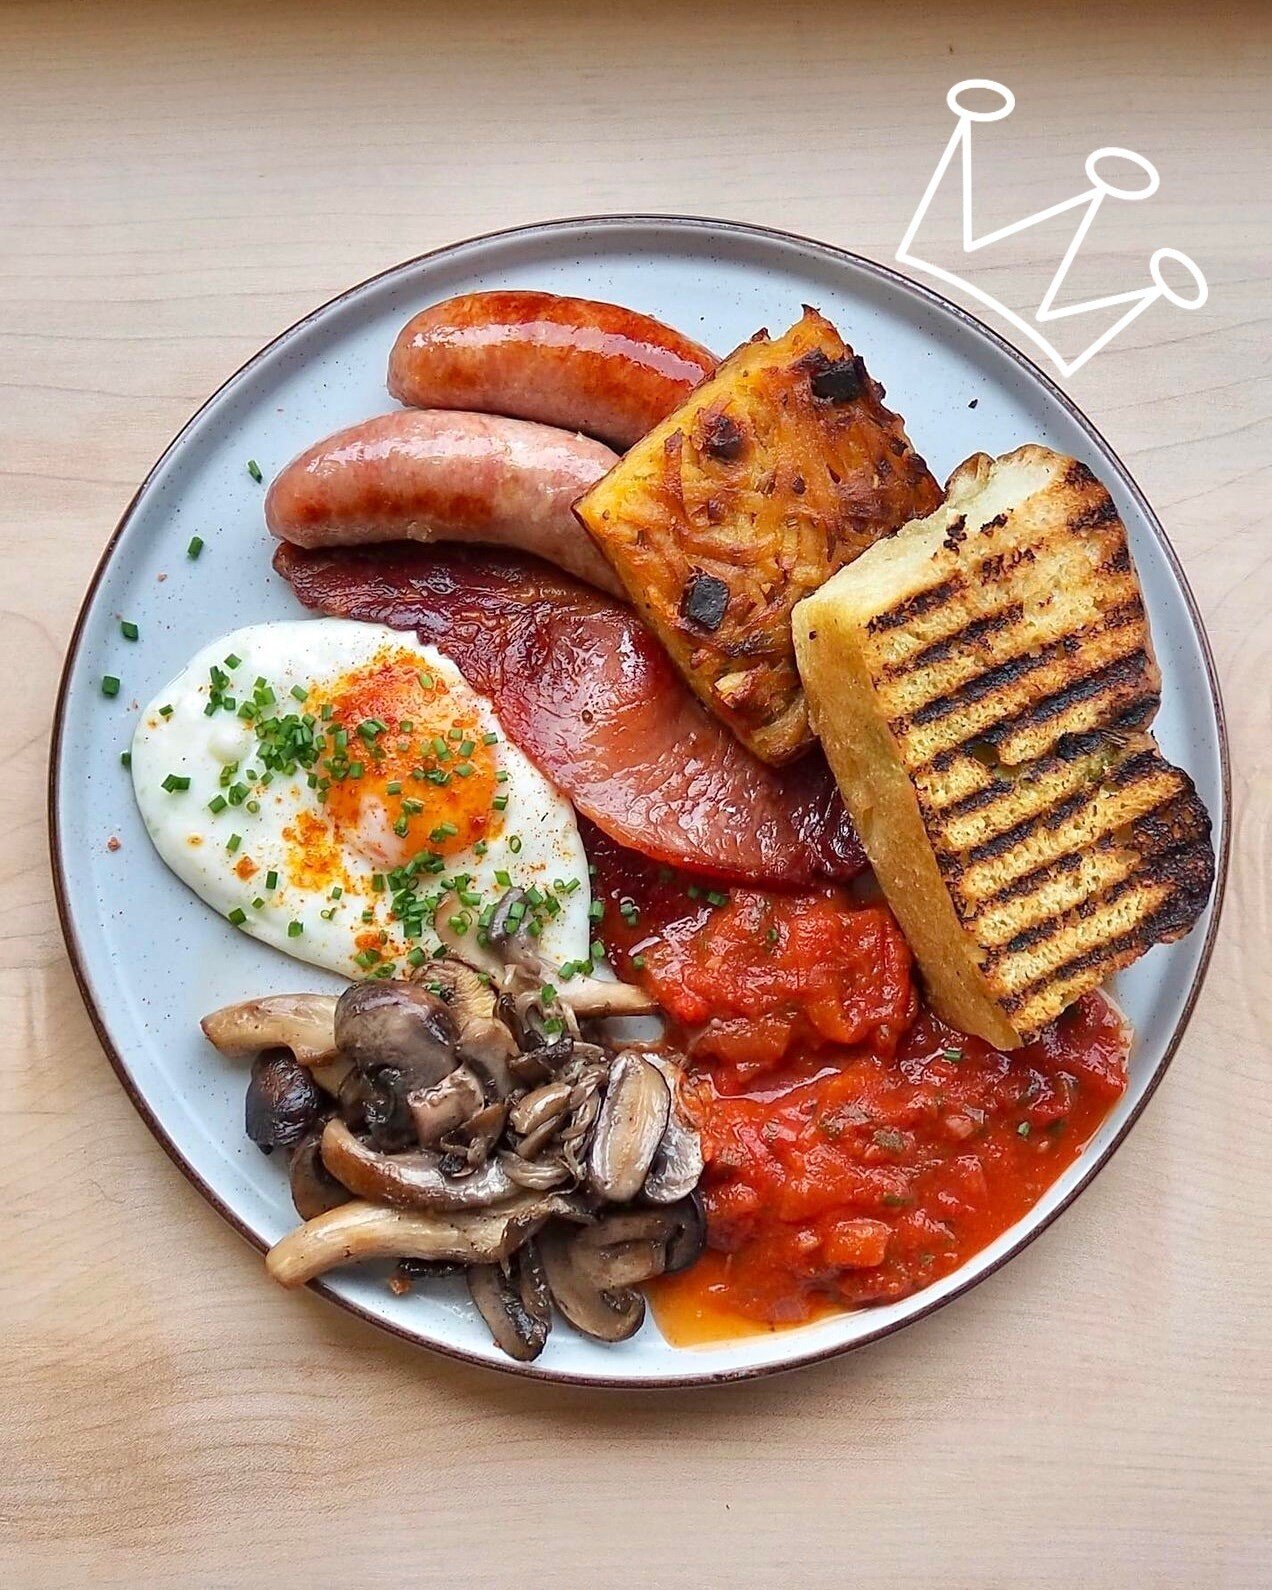 Brunch fit for a king! 👑 

Join us this bank holiday weekend for a royally good time in celebration of the King&rsquo;s Coronation. 

#dough #doughhereford #focaccia #shakshuka #wildmushrooms #brunch #breakfast